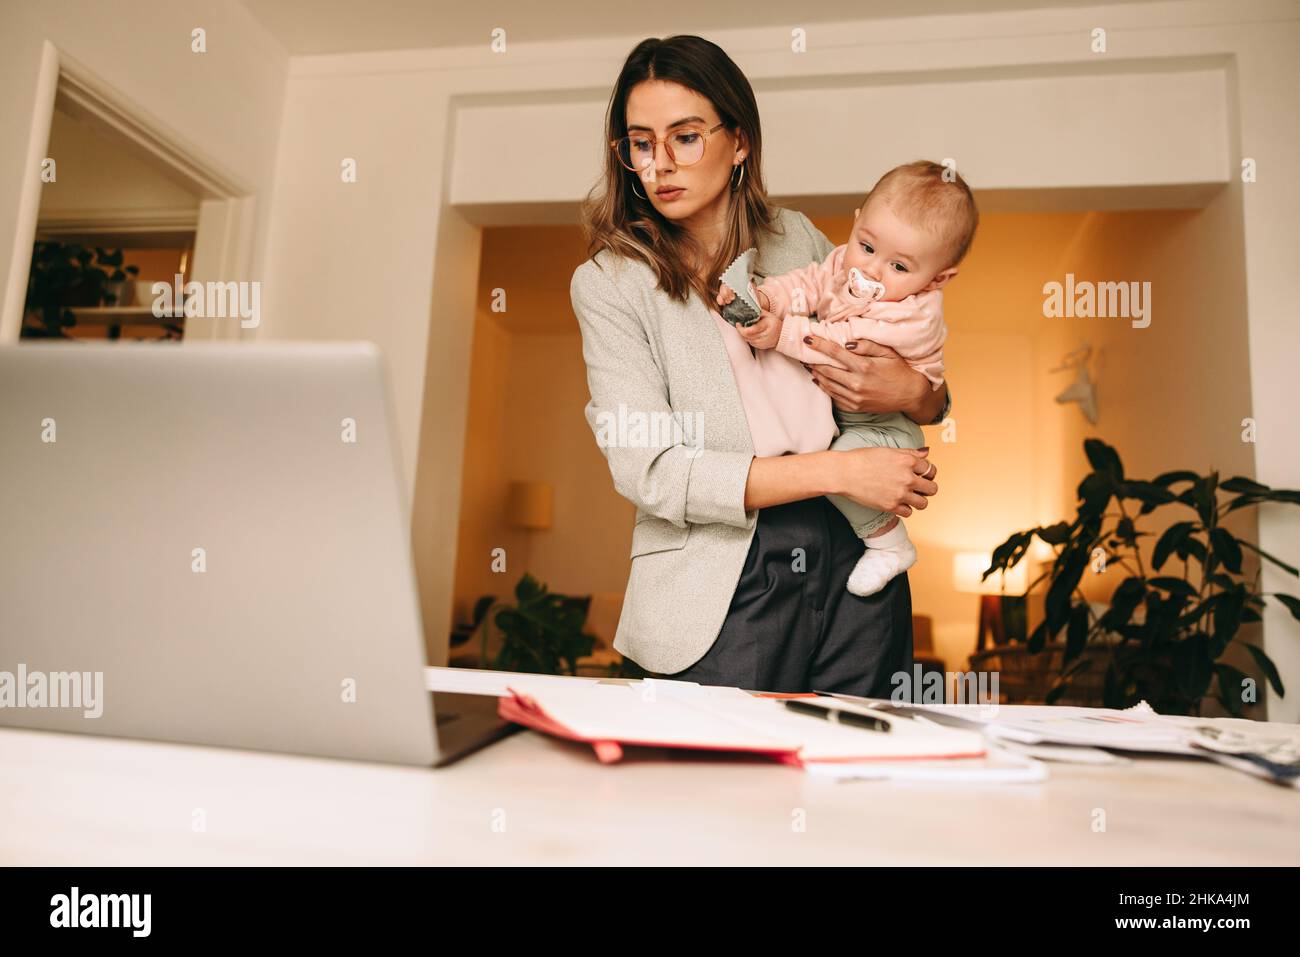 Professional interior designer holding her baby while working in her home office. Multitasking mom planning a new creative project at her desk. Busine Stock Photo